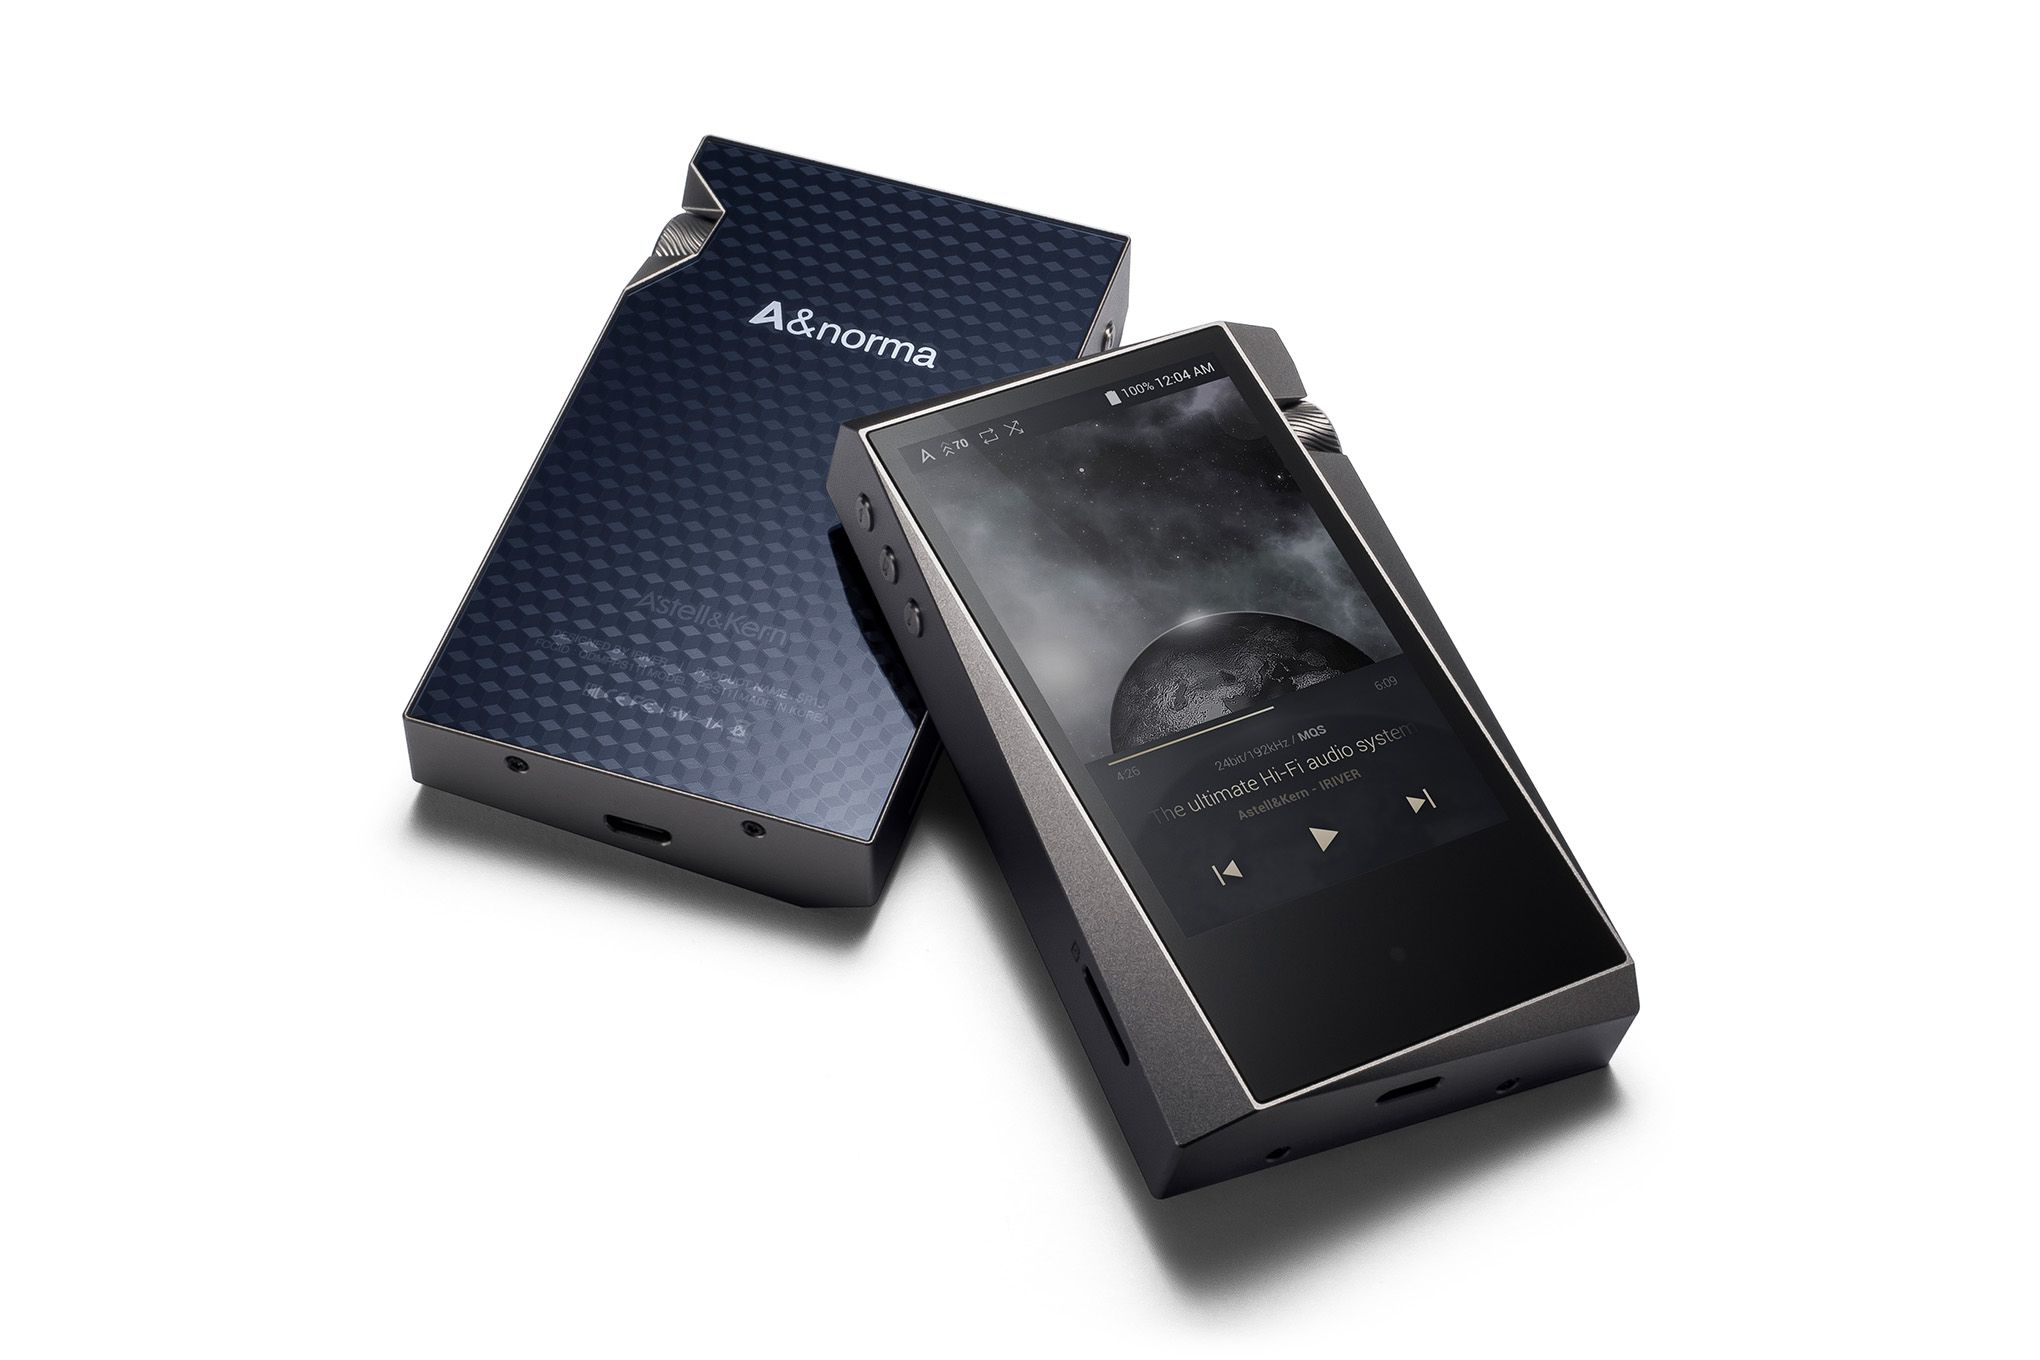 Astell & Kern's A&norma music player has a charmingly crooked 